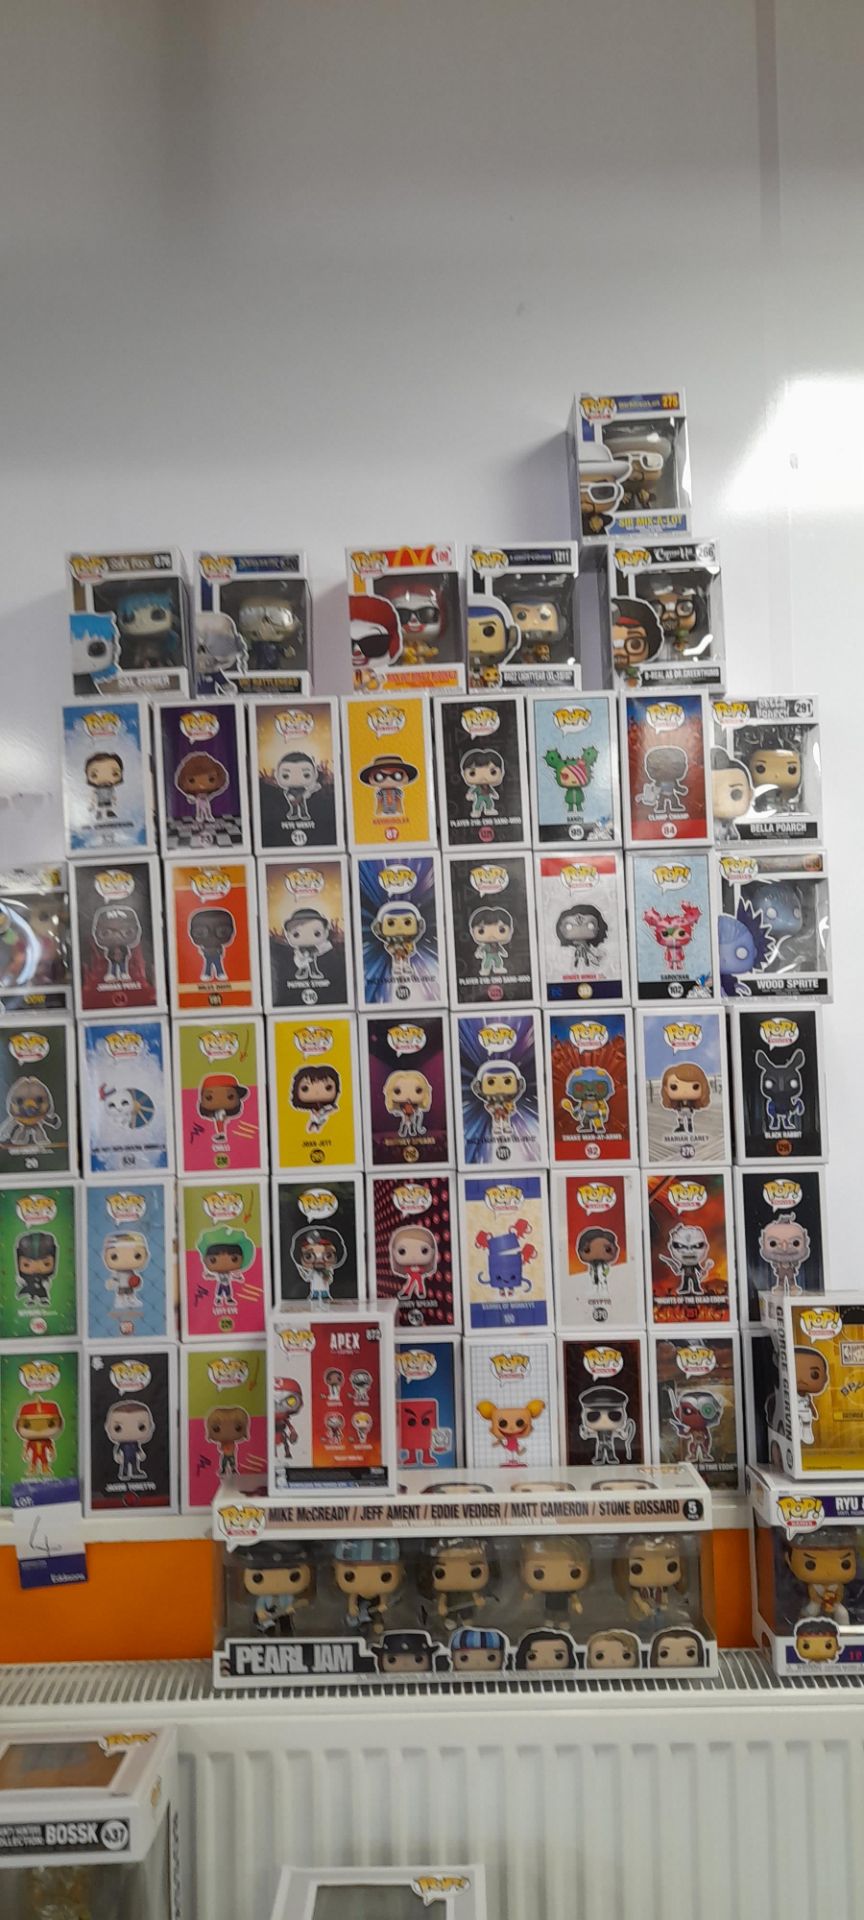 Quantity of Funko POP Collectables (Star Wars, Marvel, Heroes, TV etc.) to floor and wall - Bild 4 aus 8